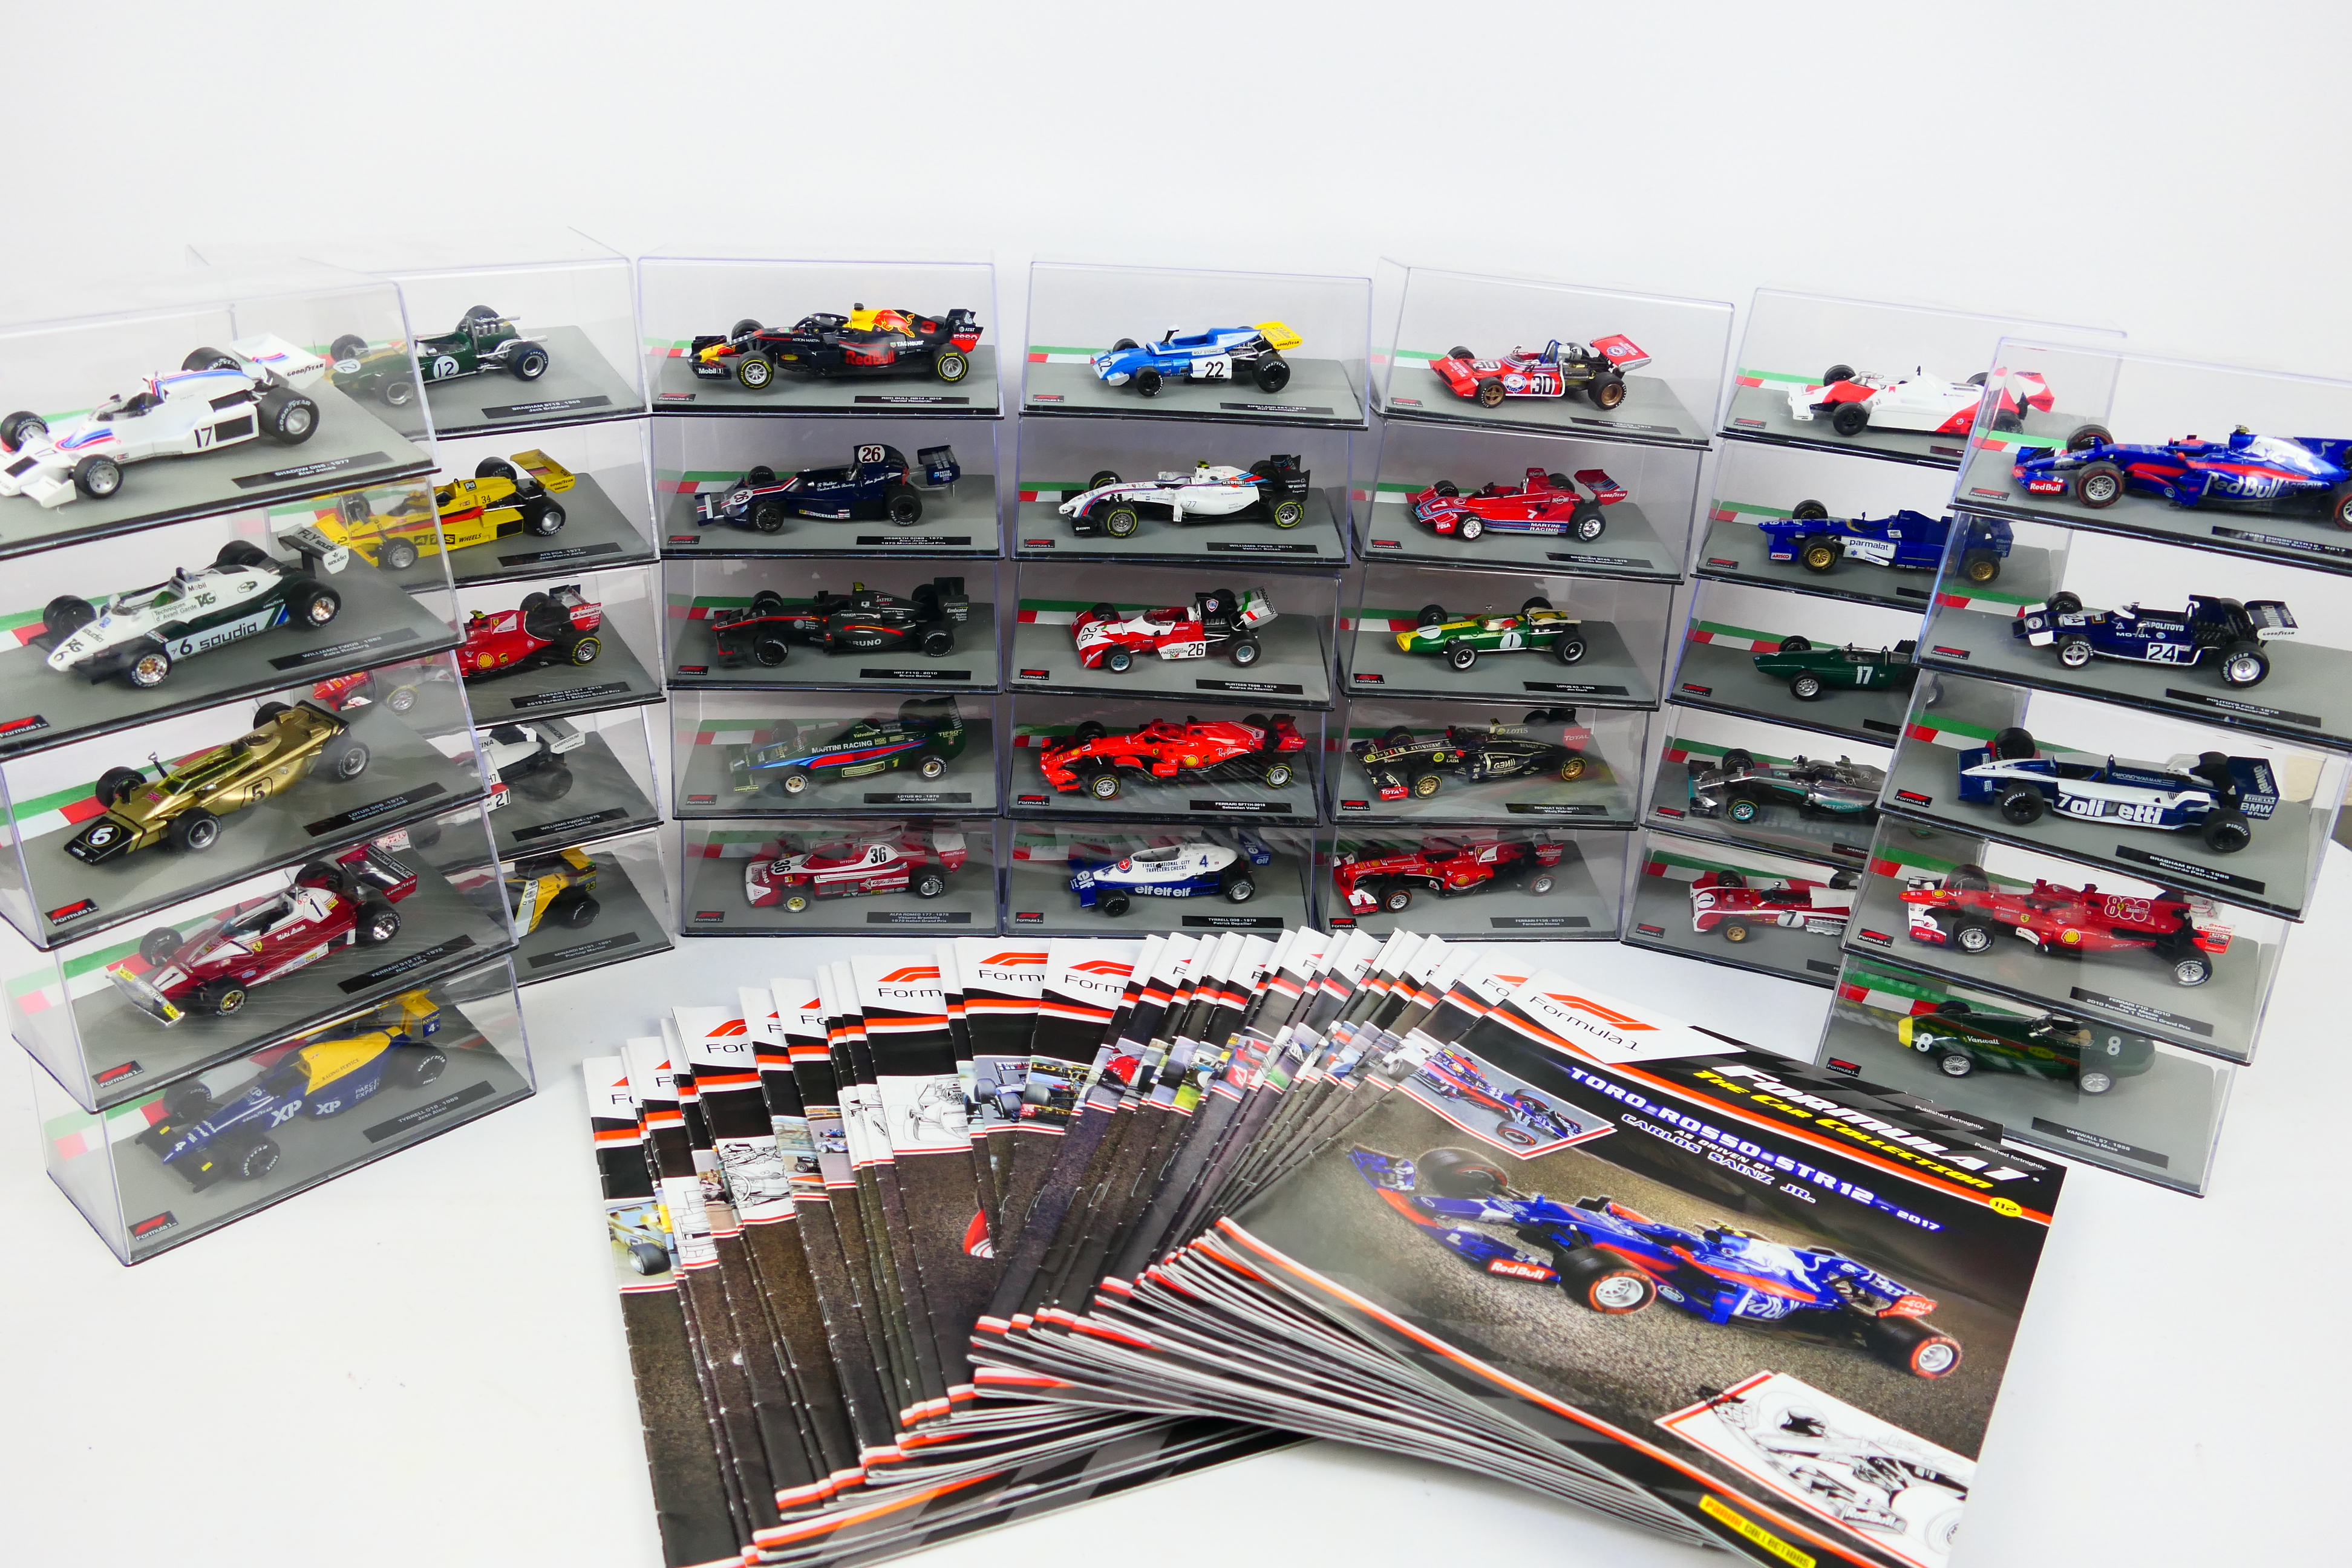 Centauria - Panini - Formula 1 - 35 x models from Formula 1 The Car Collection with the cars and - Image 2 of 14